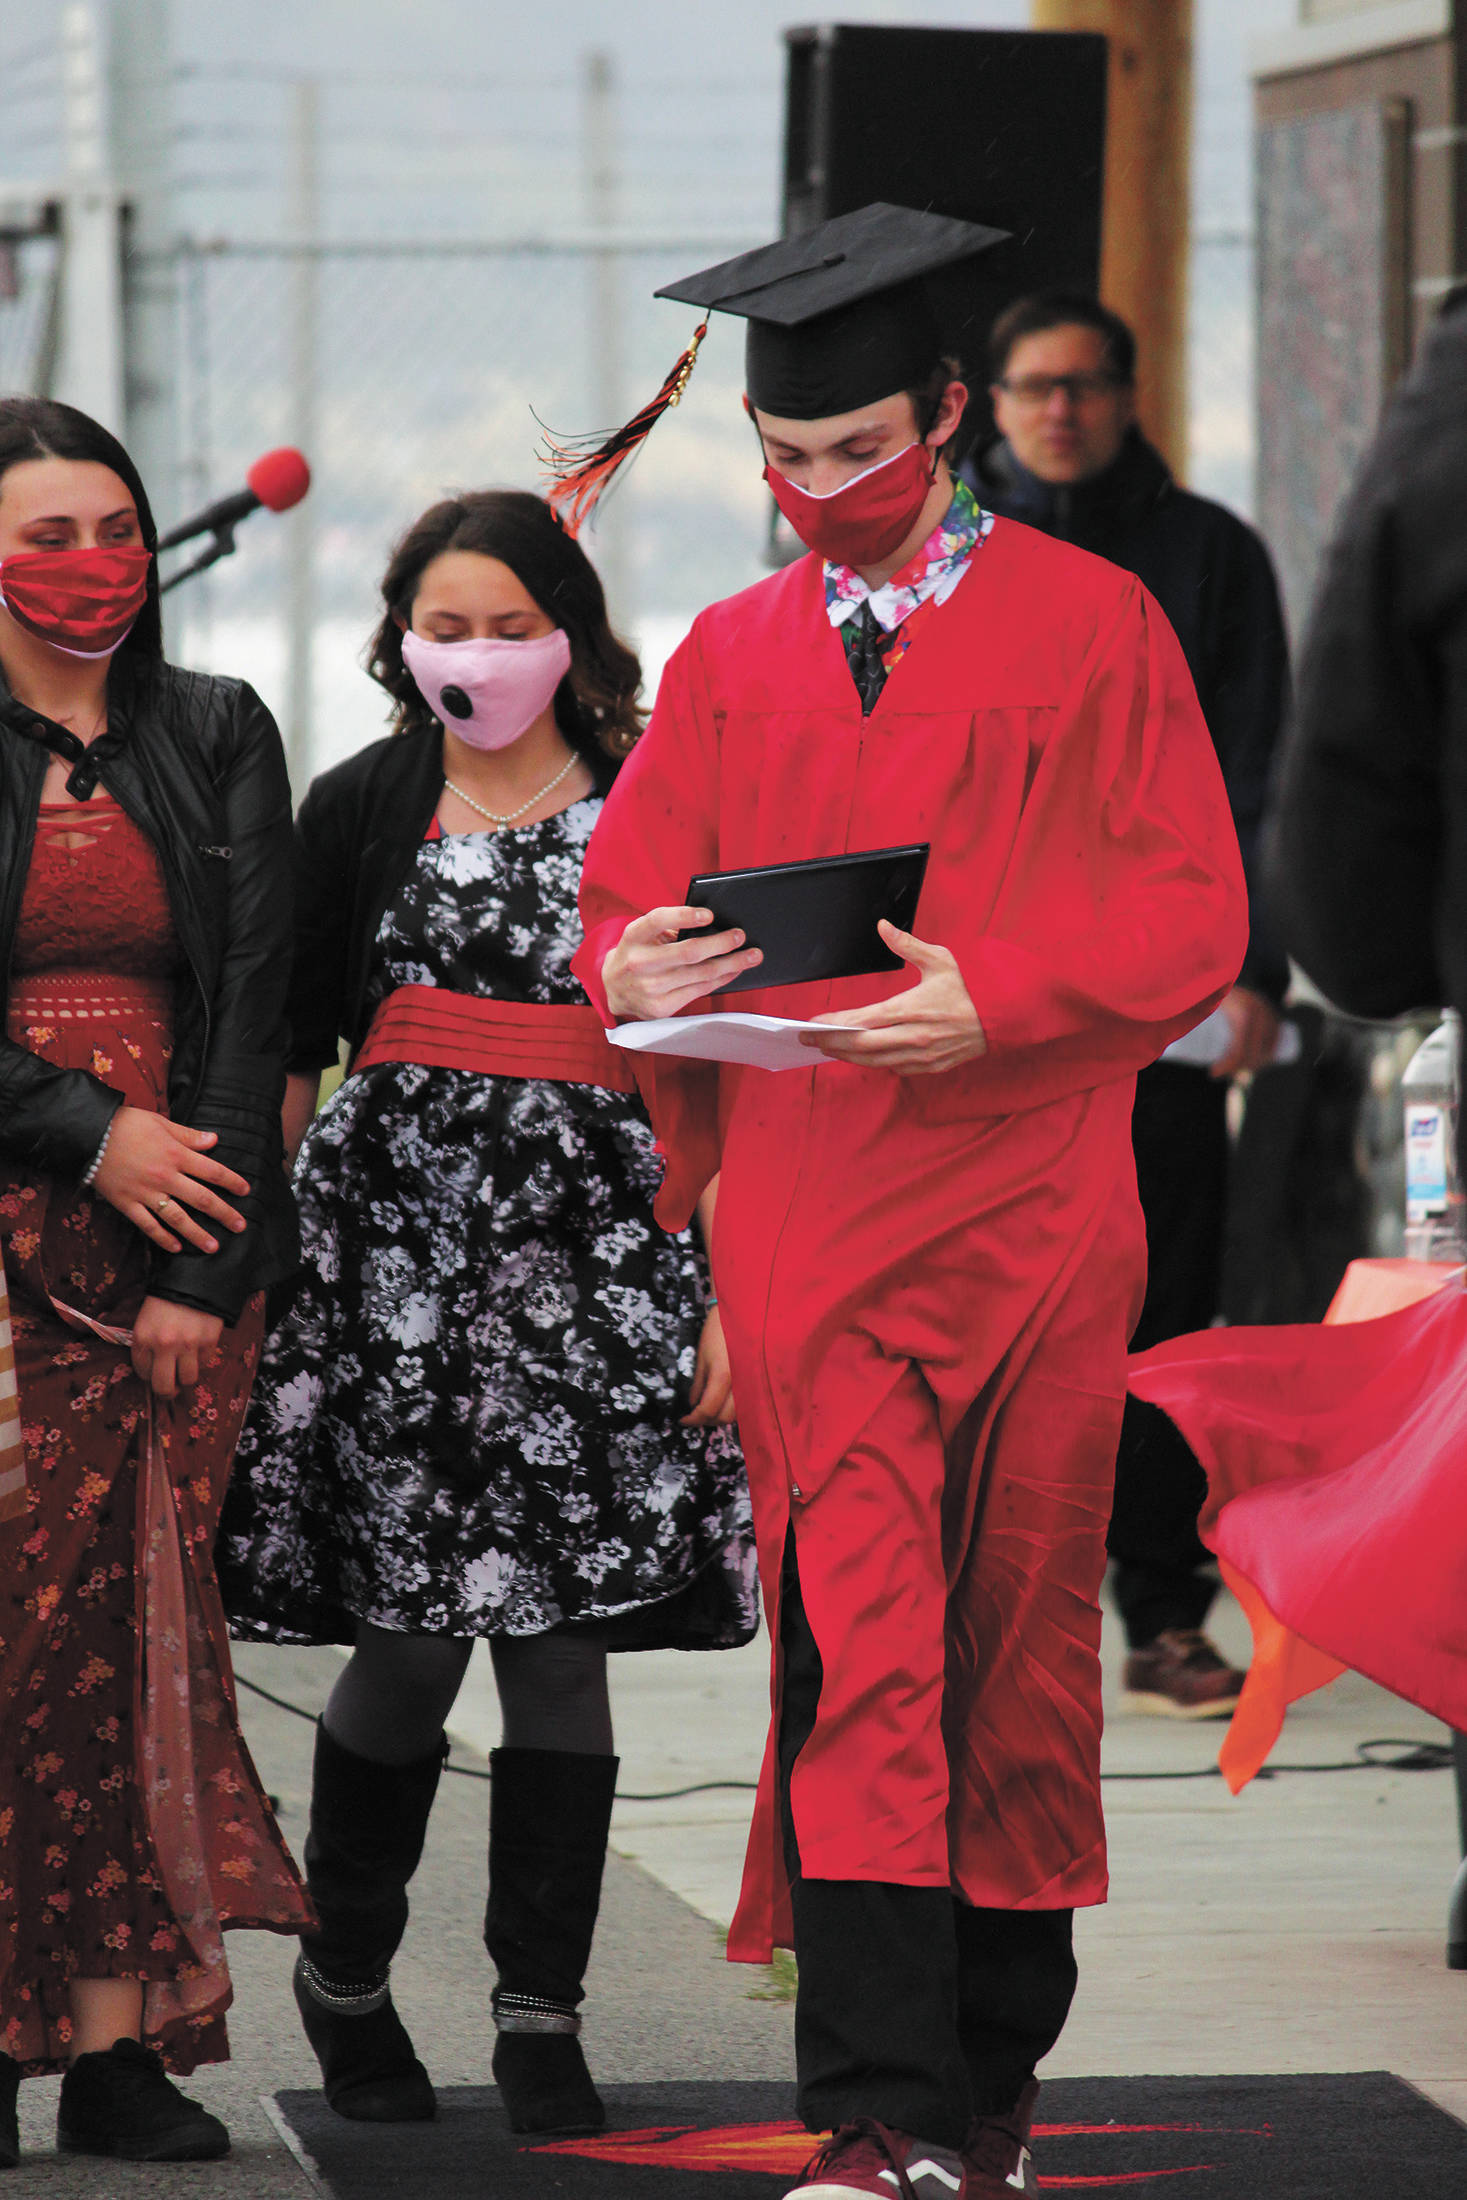 Homer Flex School graduate Jonathen Bice-Dee collects his diploma with friends and members of his family during a Monday, May 18, 2020 graduation ceremony for the school at the Homer Harbor in Homer, Alaska. (Photo by Megan Pacer/Homer News)